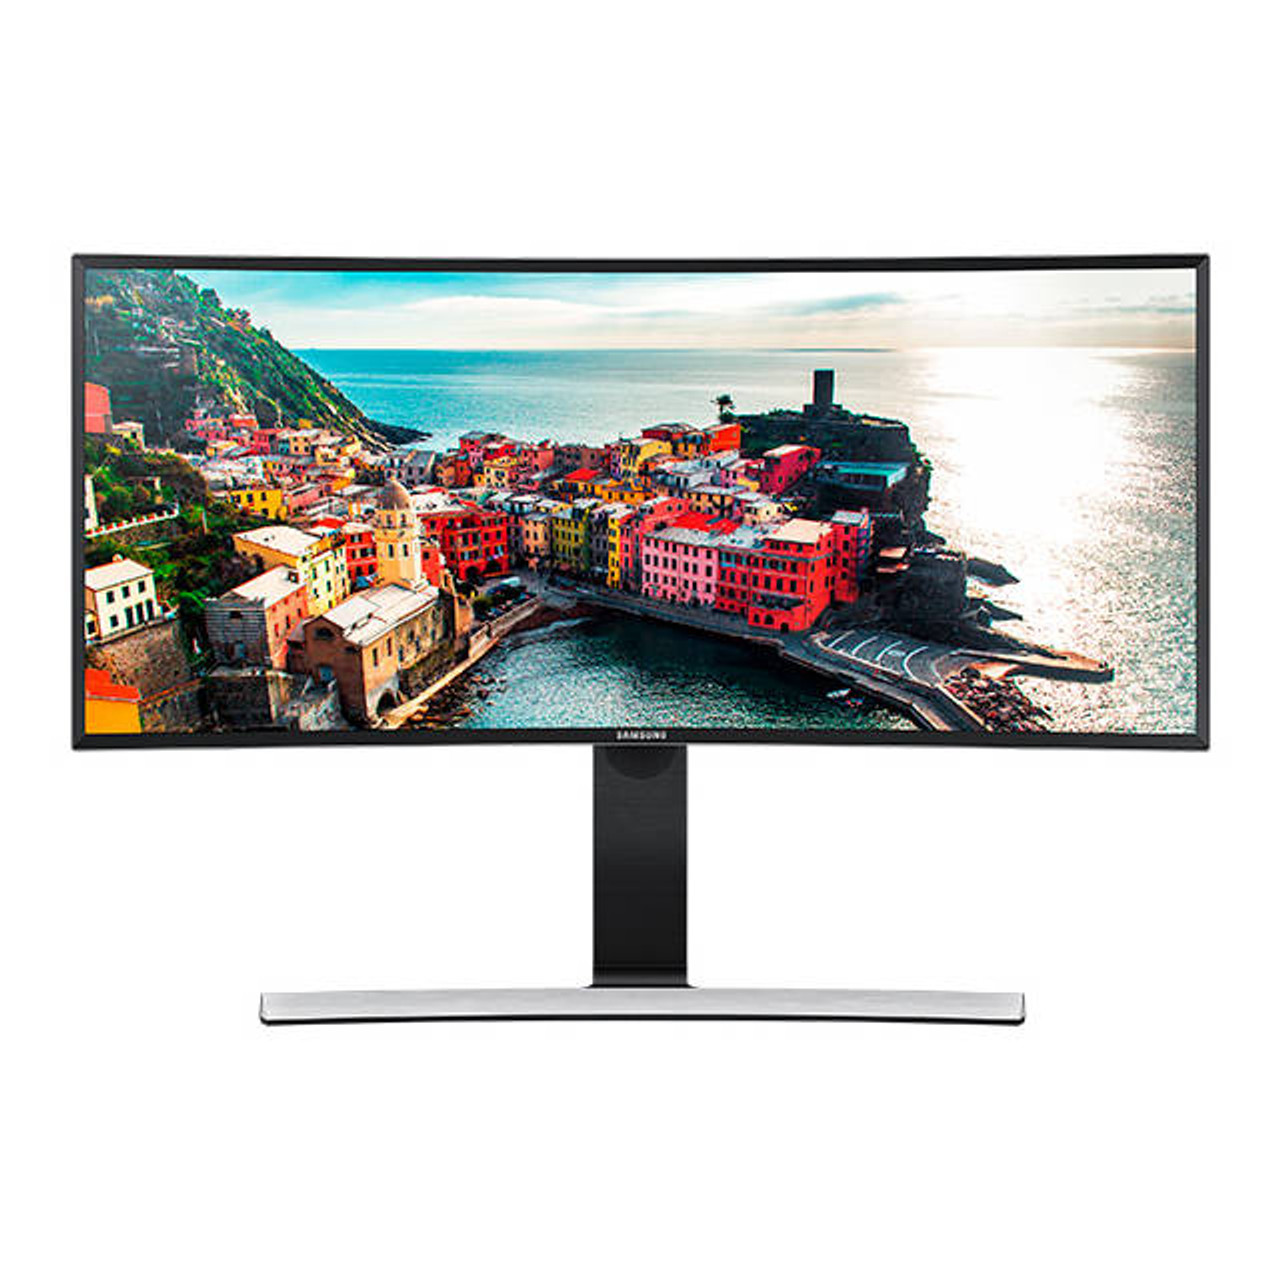 Samsung S34E790C 34 inch Curved Widescreen 3,000:1 4ms HDMI/DisplayPort/USB LED LCD Monitor, w/ Speakers (High Glossy Black)